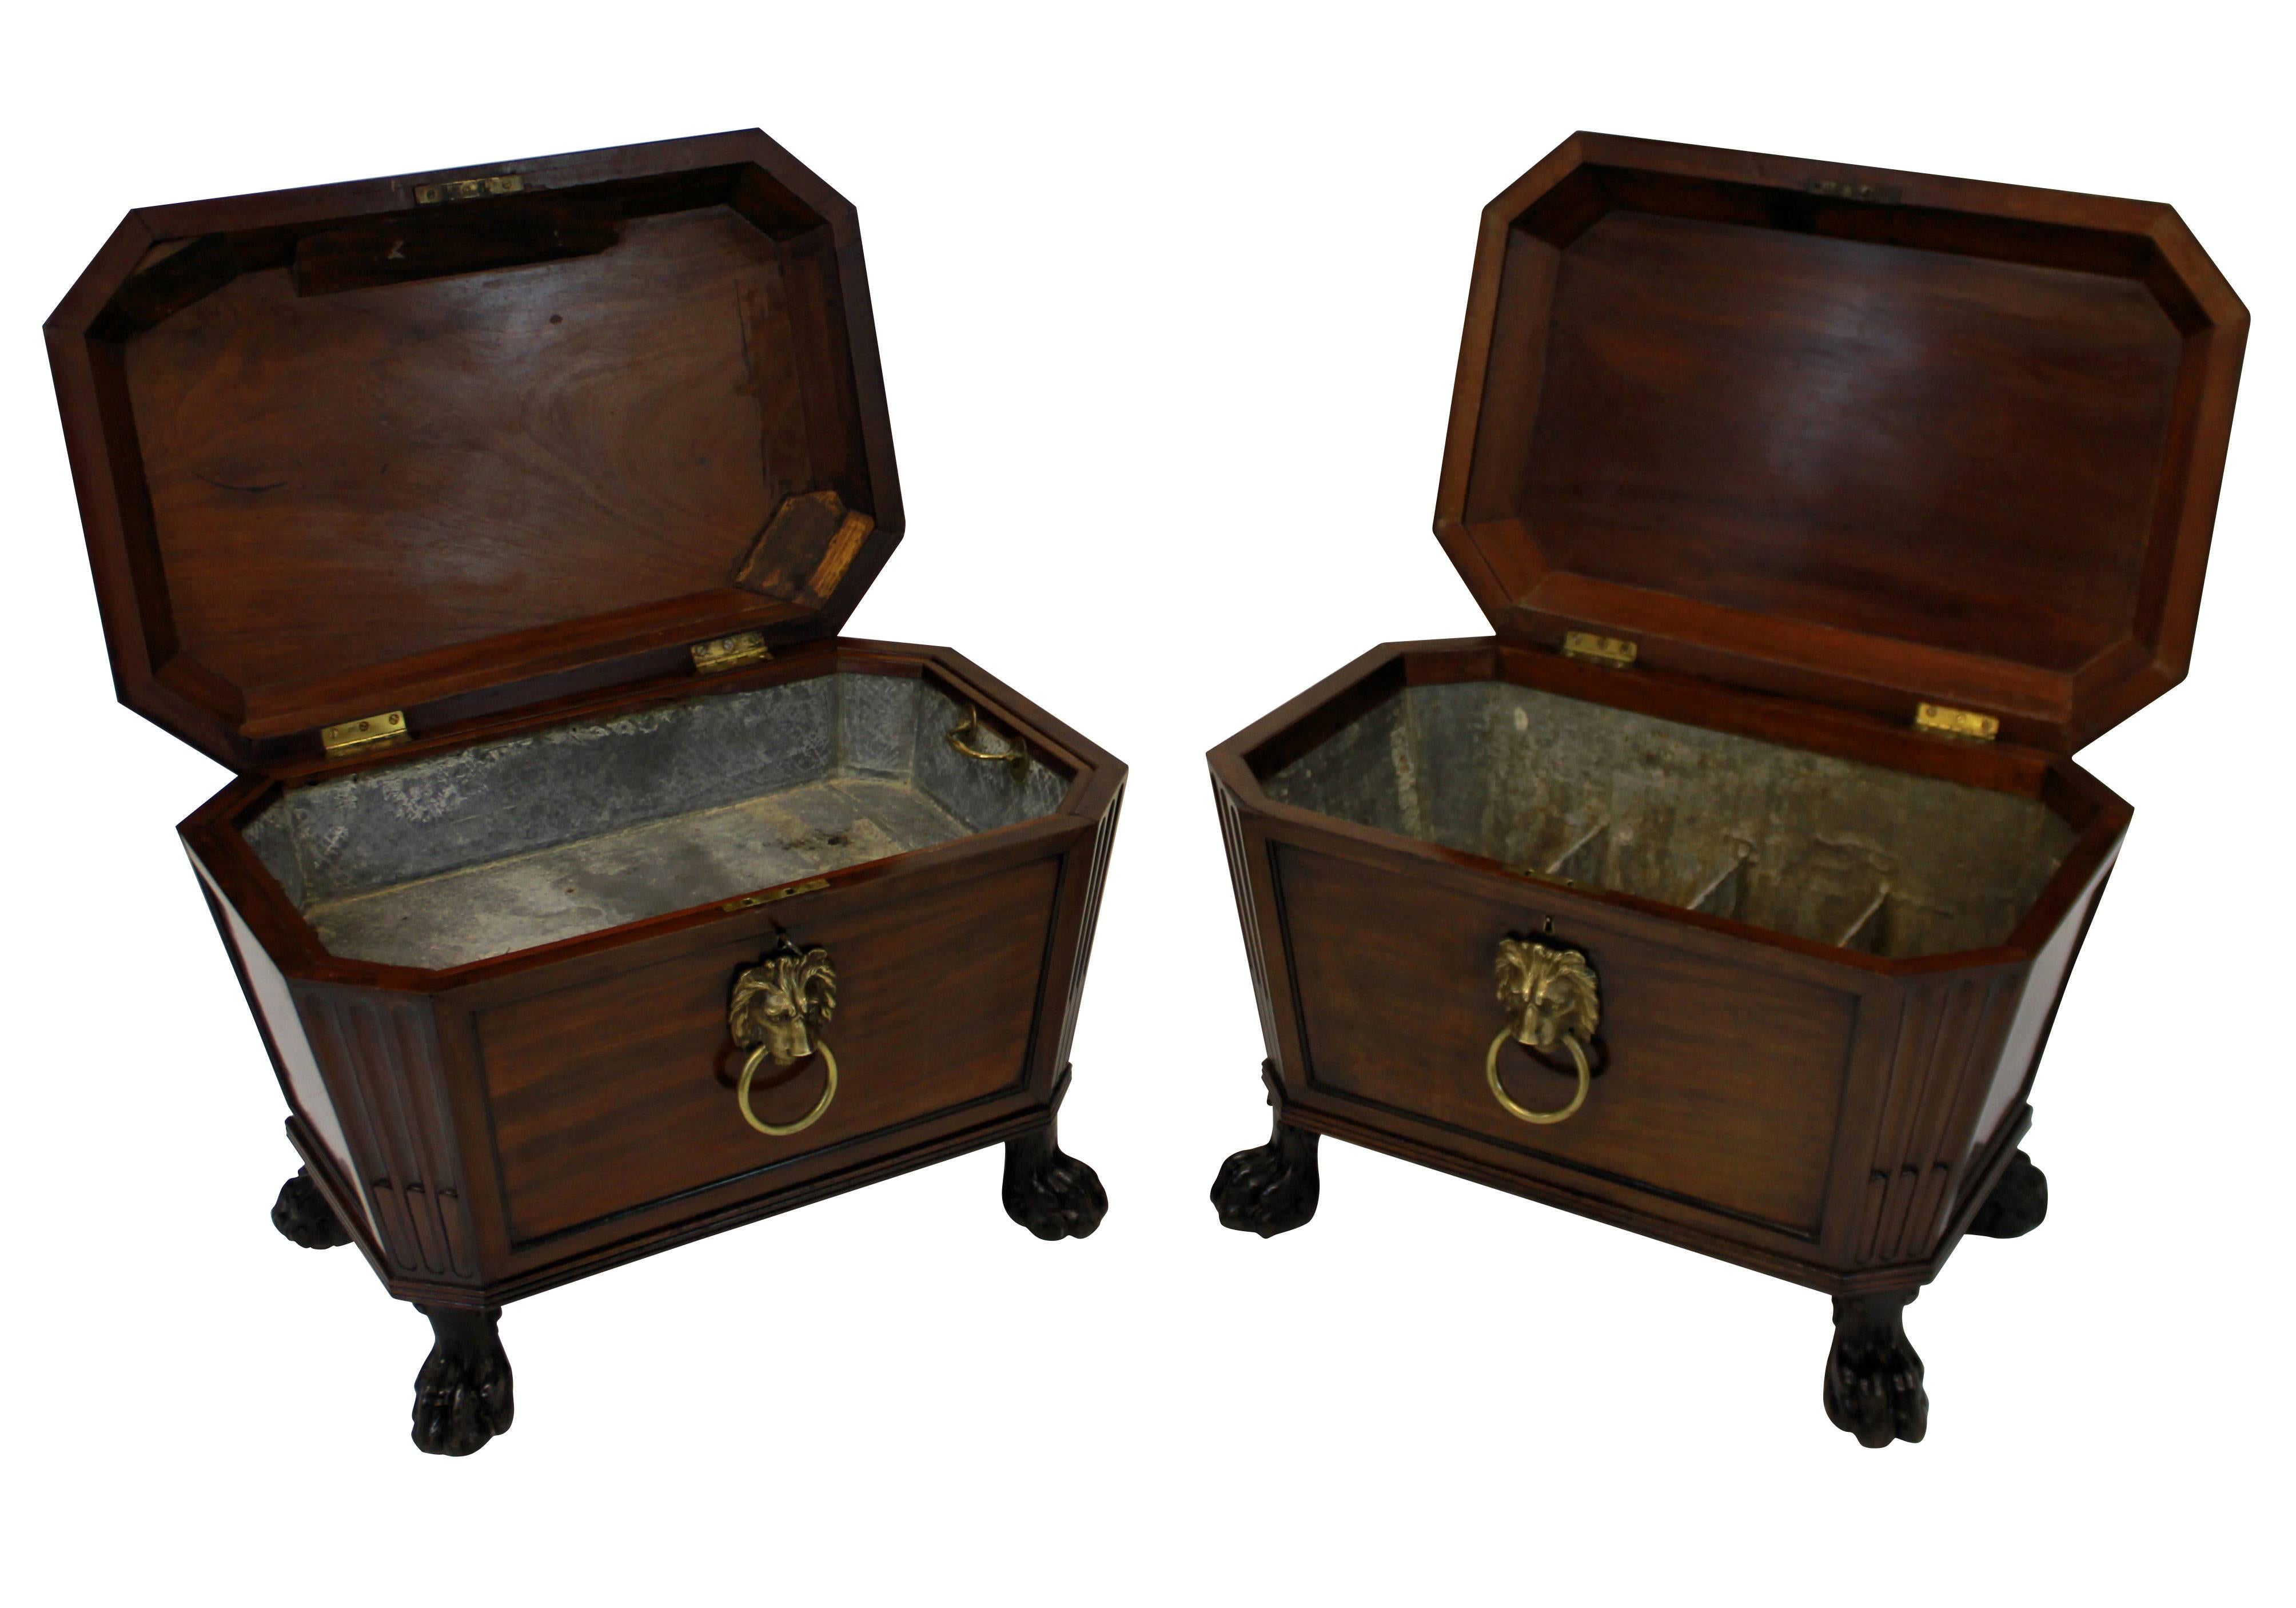 English Pair of Large Country House Wine Coolers in the Manner of Thomas Hope